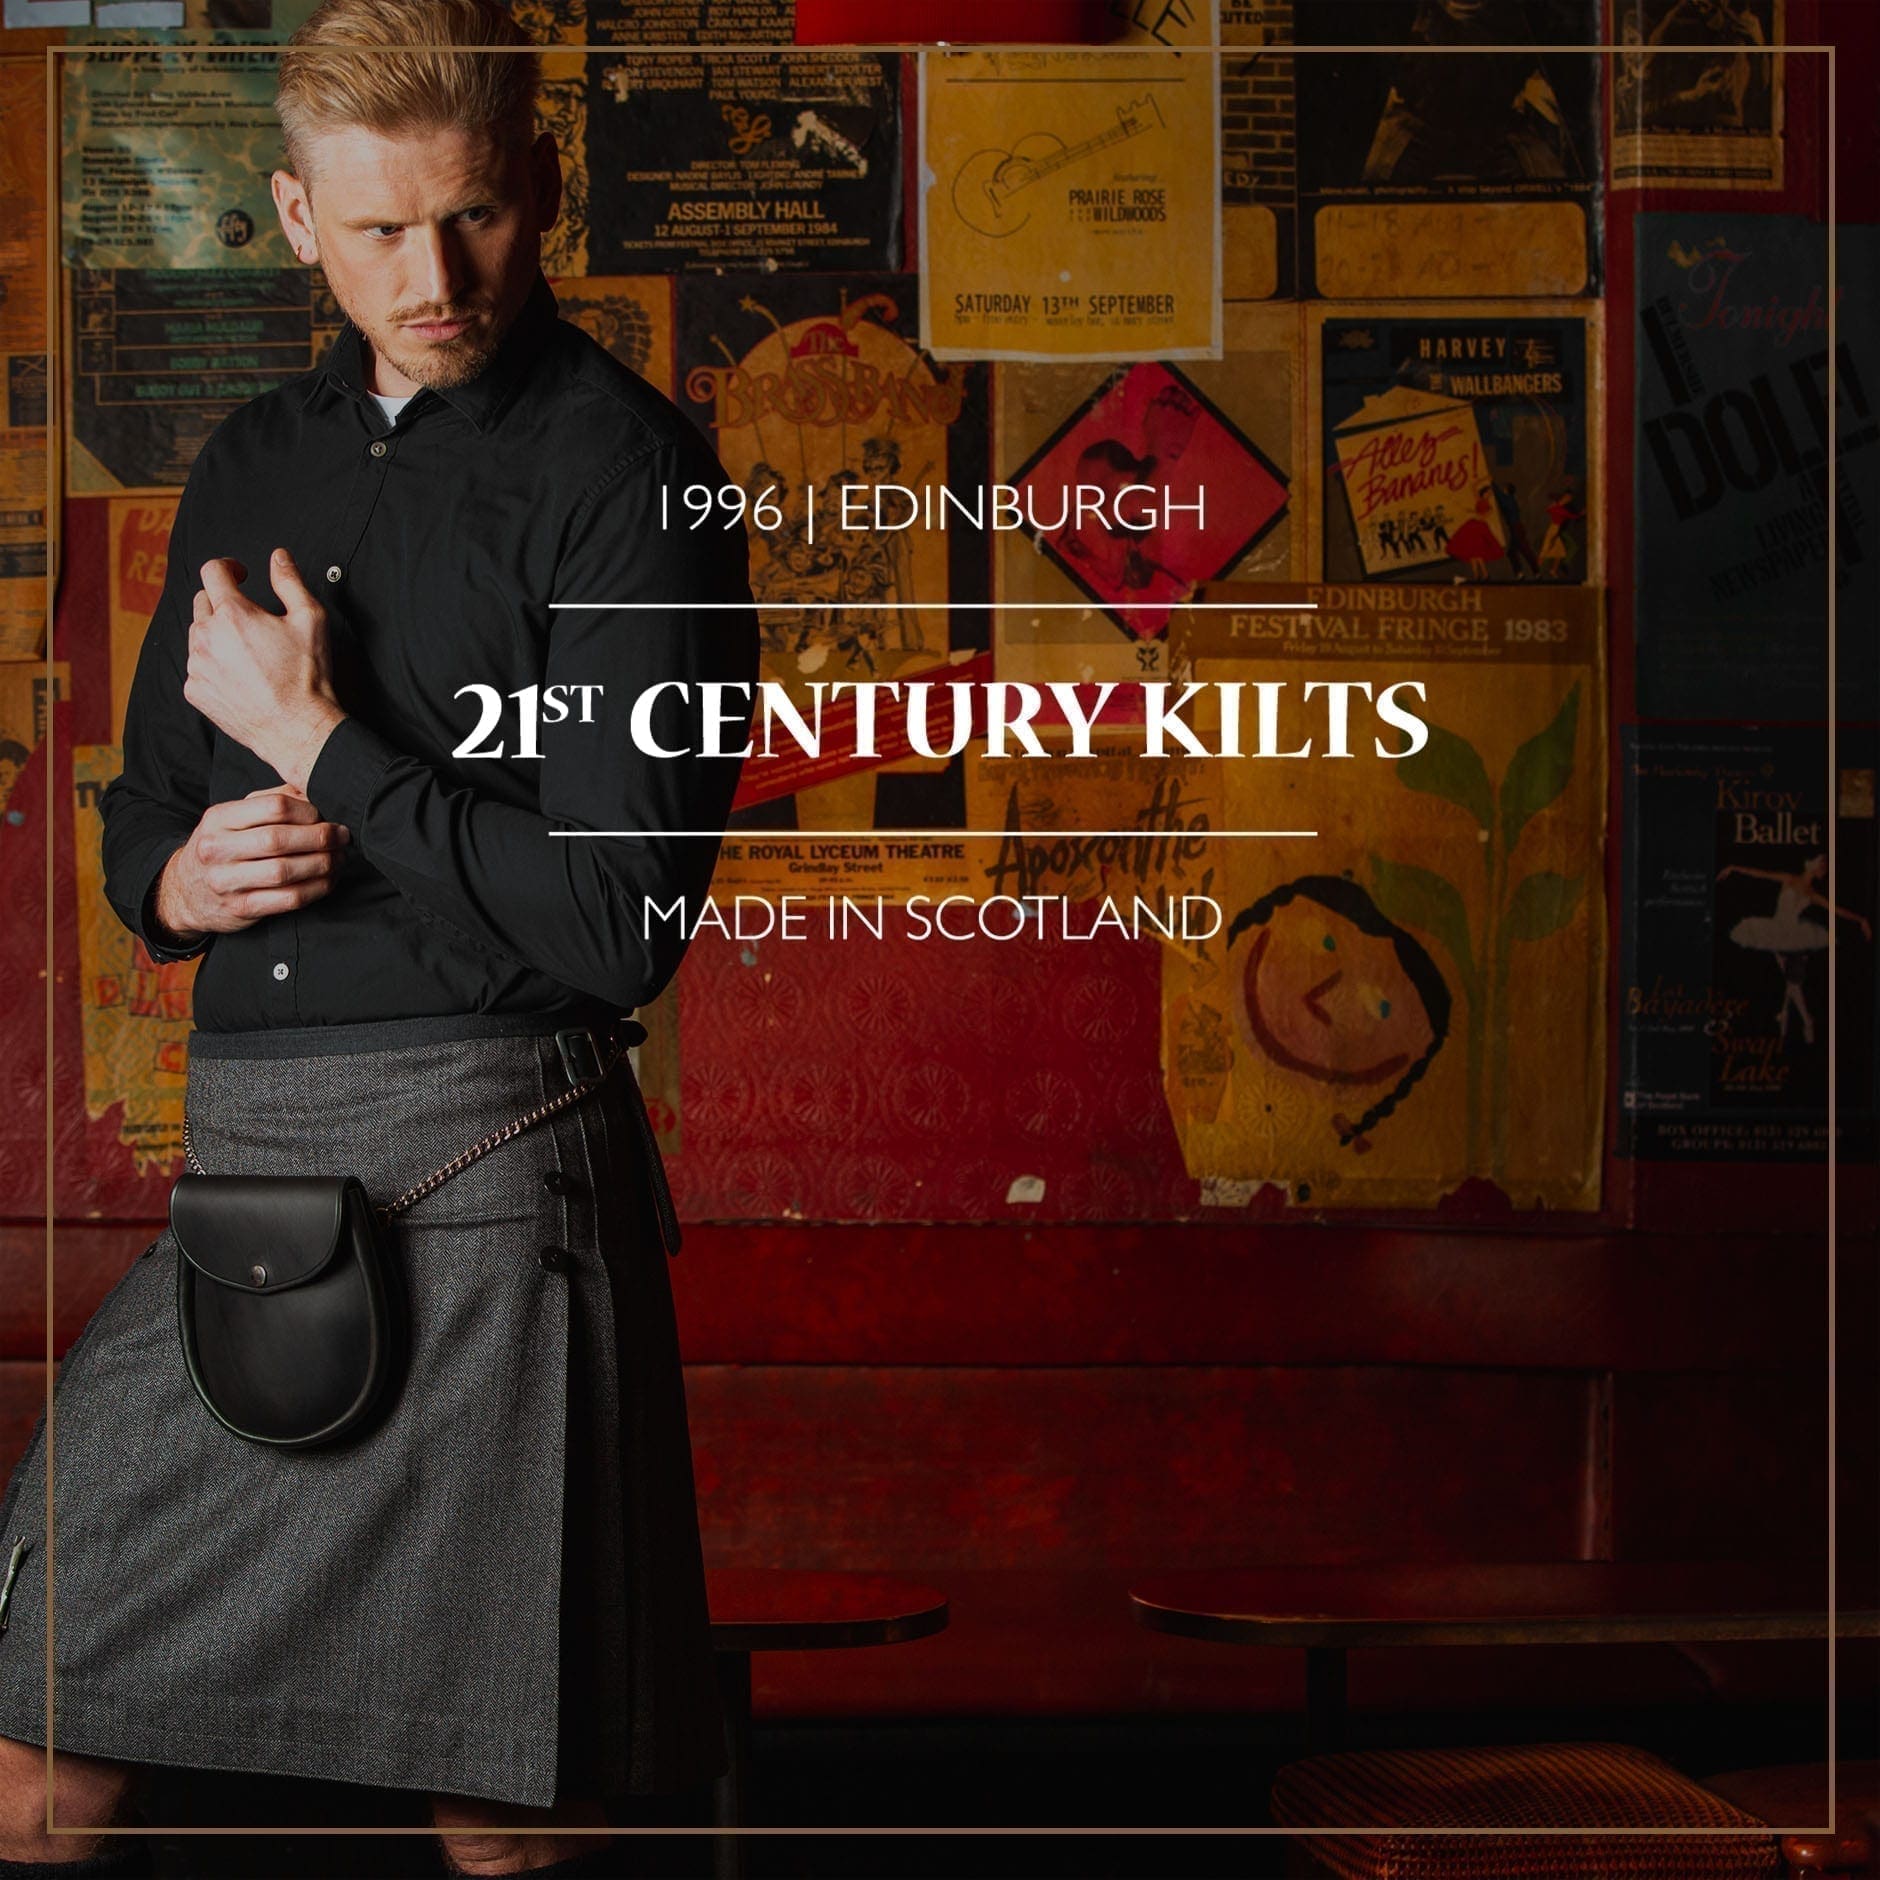 21st Century Kilts collaborate in ourphotoshoots lending some of their original and unique kilts wit an special modern touch.